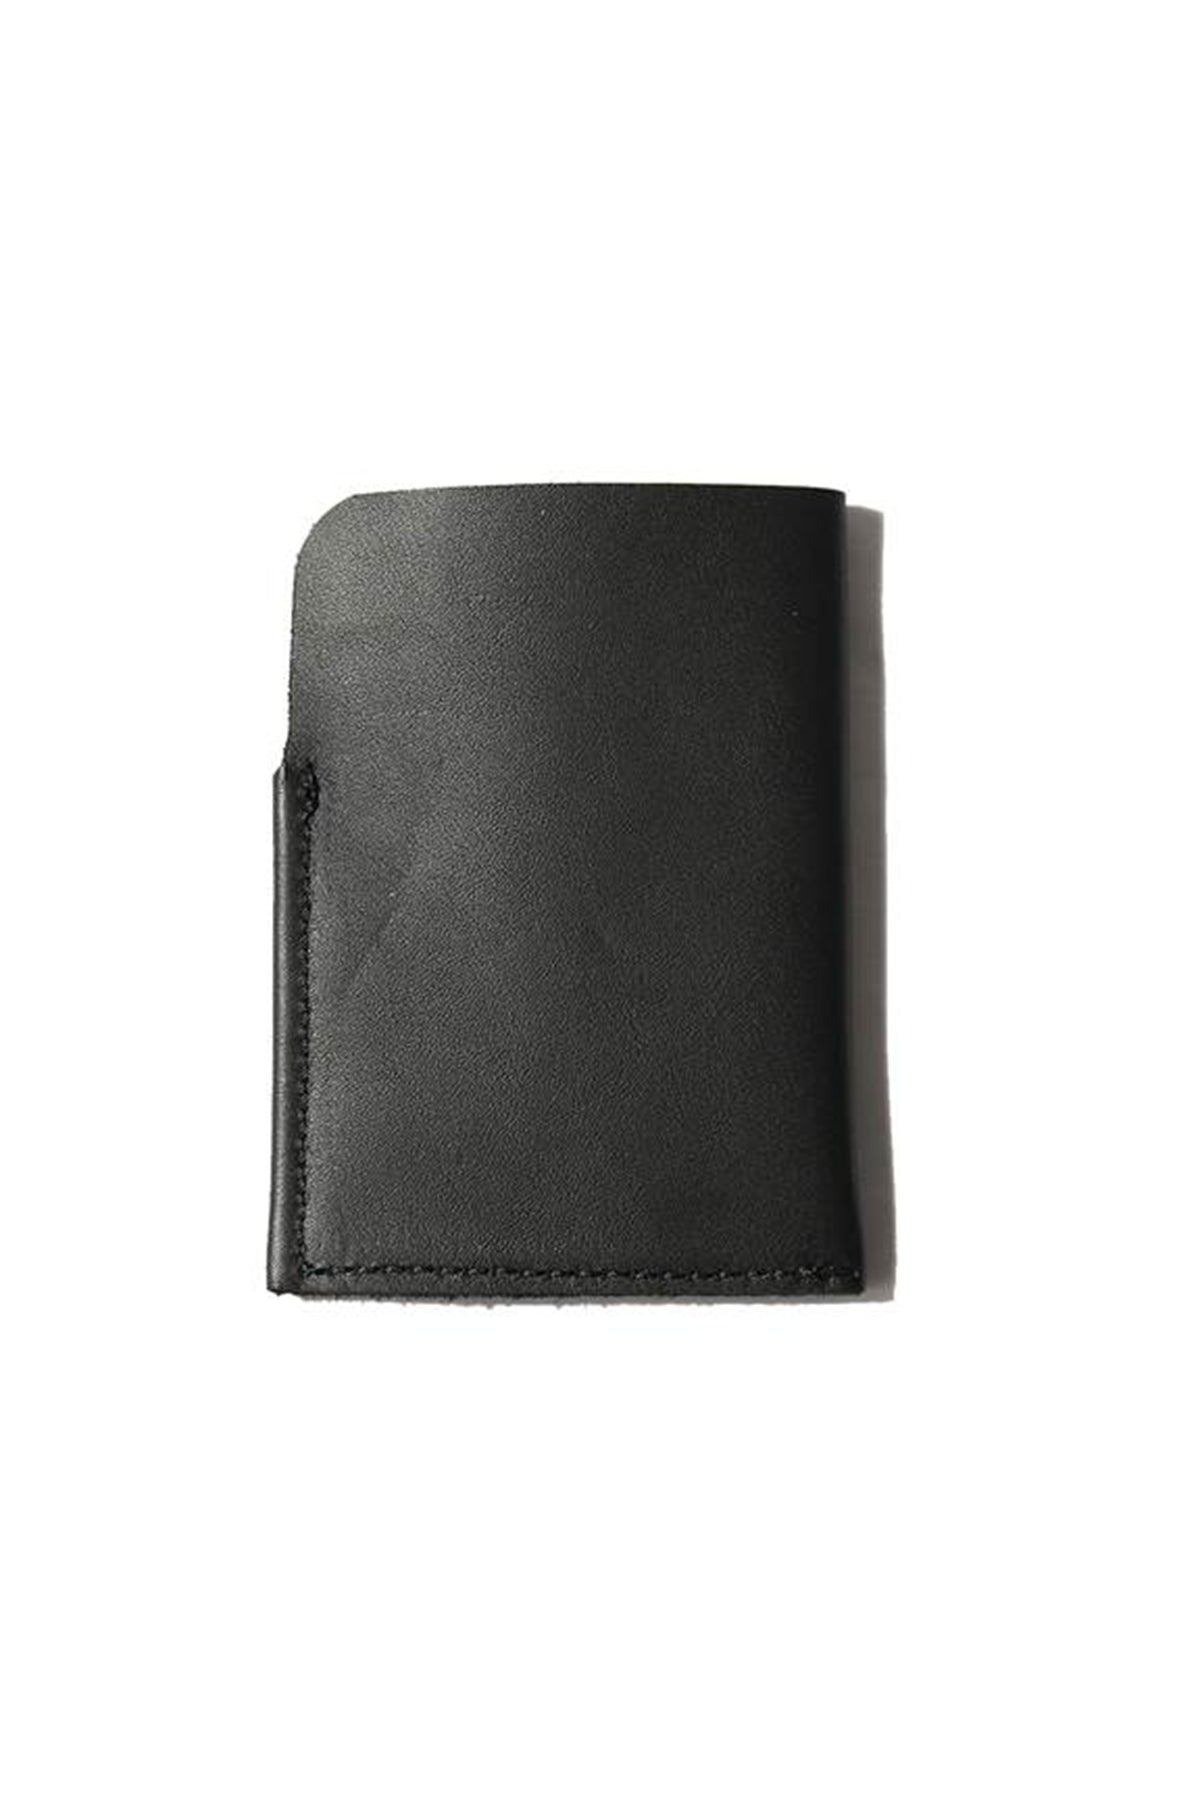   A minimalist SOFT LEATHER CARD HOLDER crafted by local artisans, showcasing the essence of our Lima Sagrada brand. 